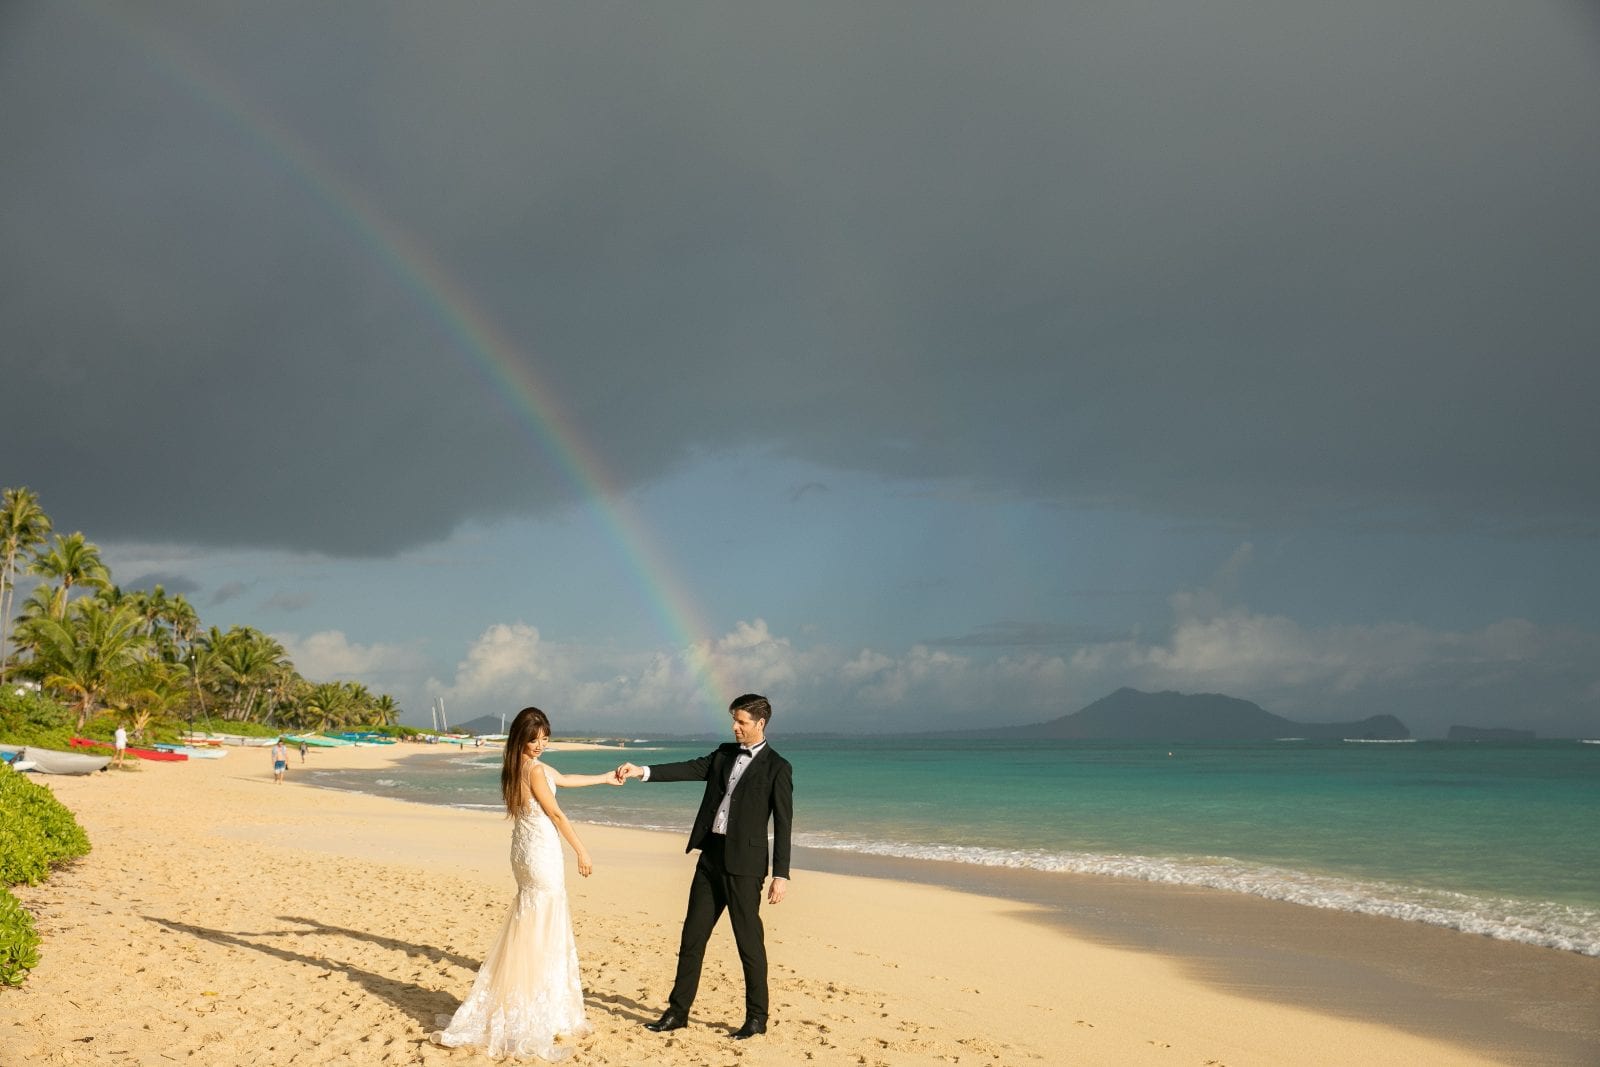 bride and groom holding hands on the beach with cloudy skies and rainbow